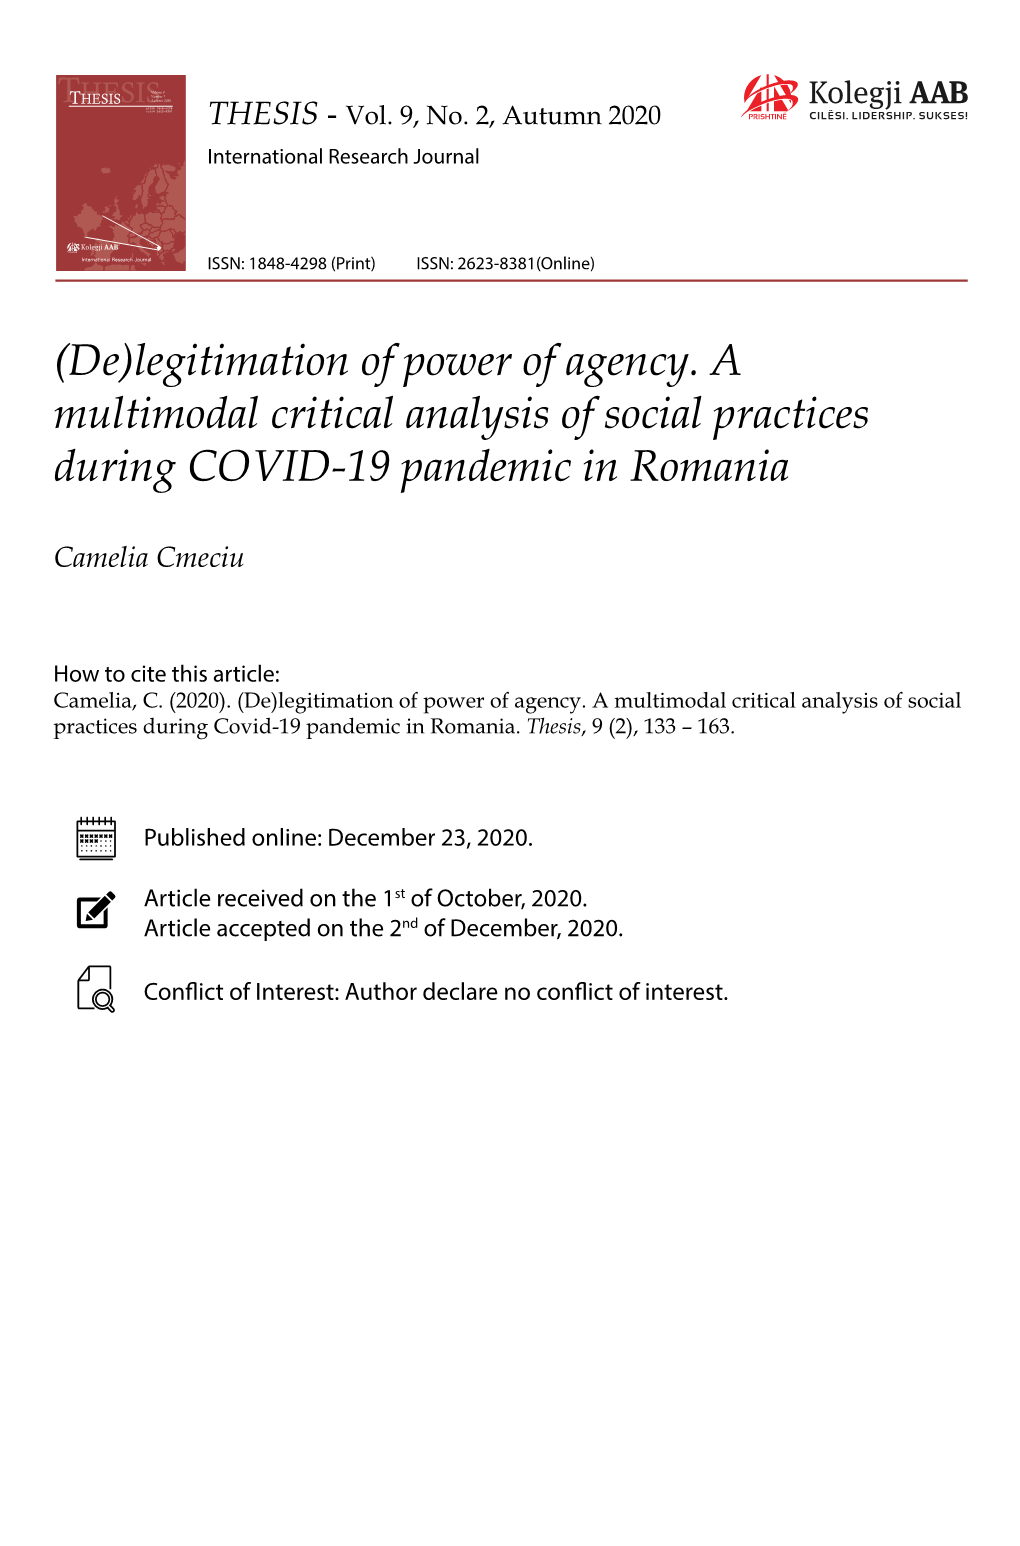 (De)Legitimation of Power of Agency. a Multimodal Critical Analysis of Social Practices During COVID-19 Pandemic in Romania